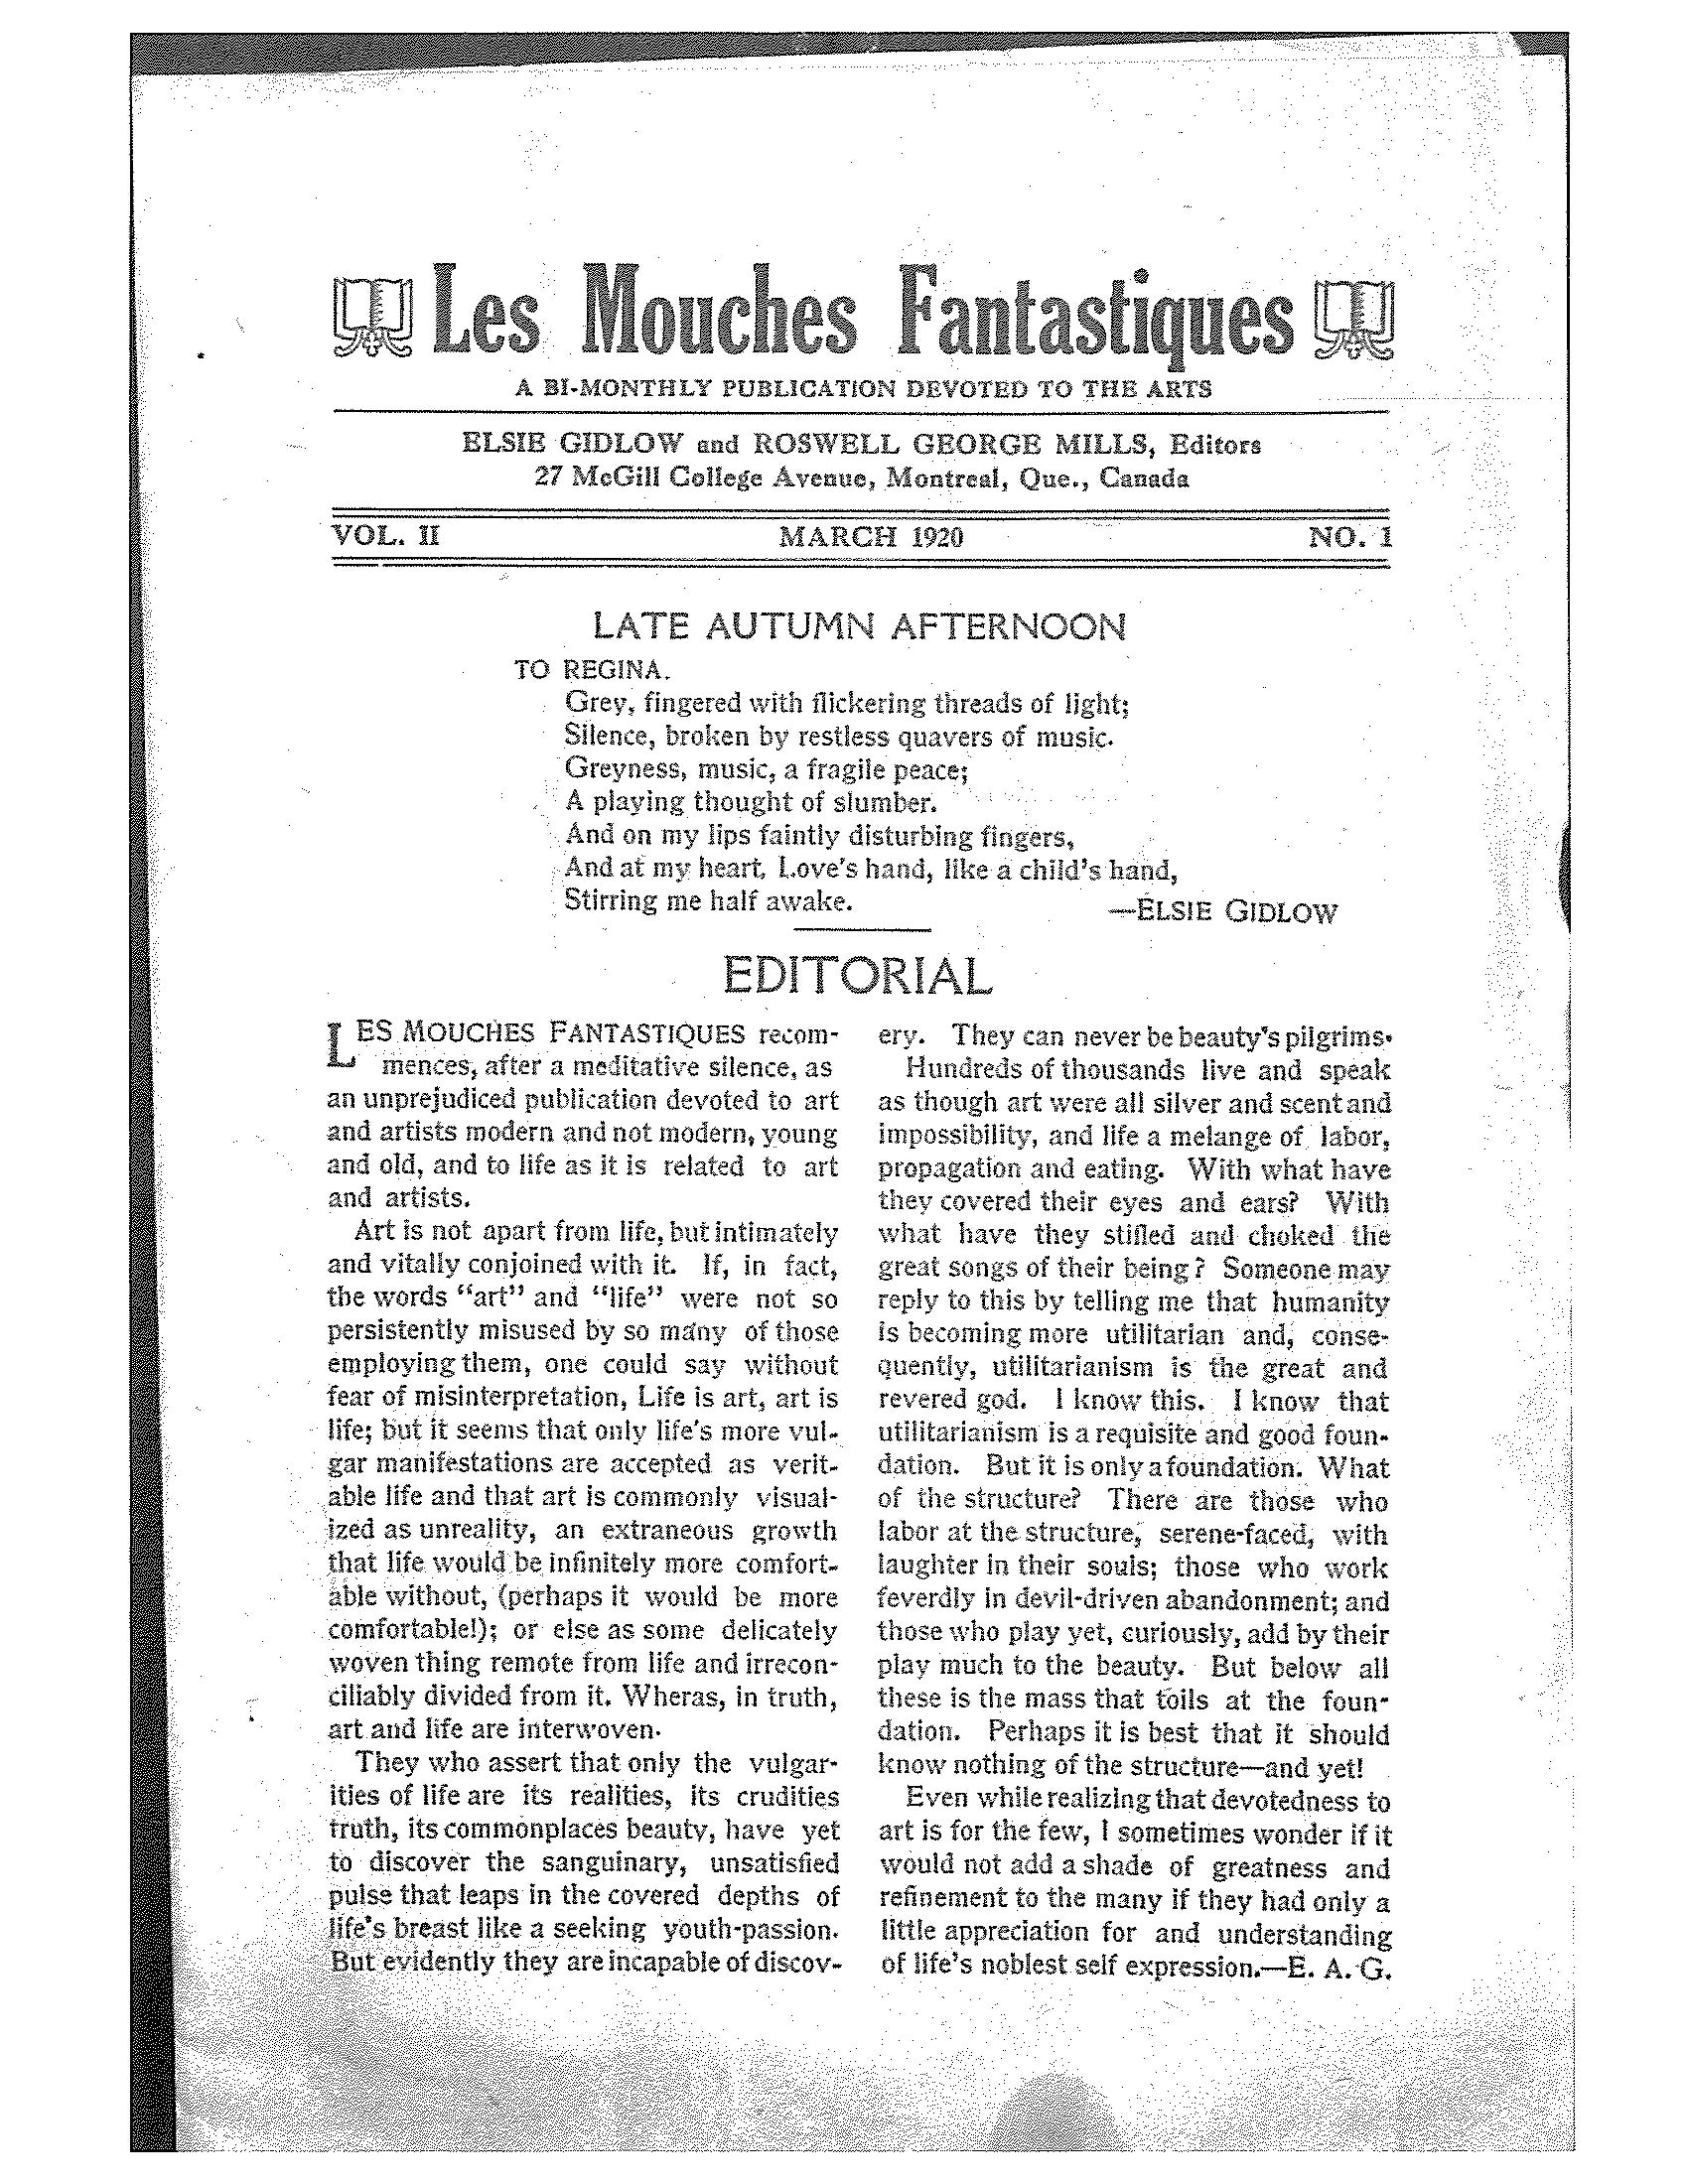 Cover page of a newsletter, including the title and date of publication, a poem, and a short editorial.